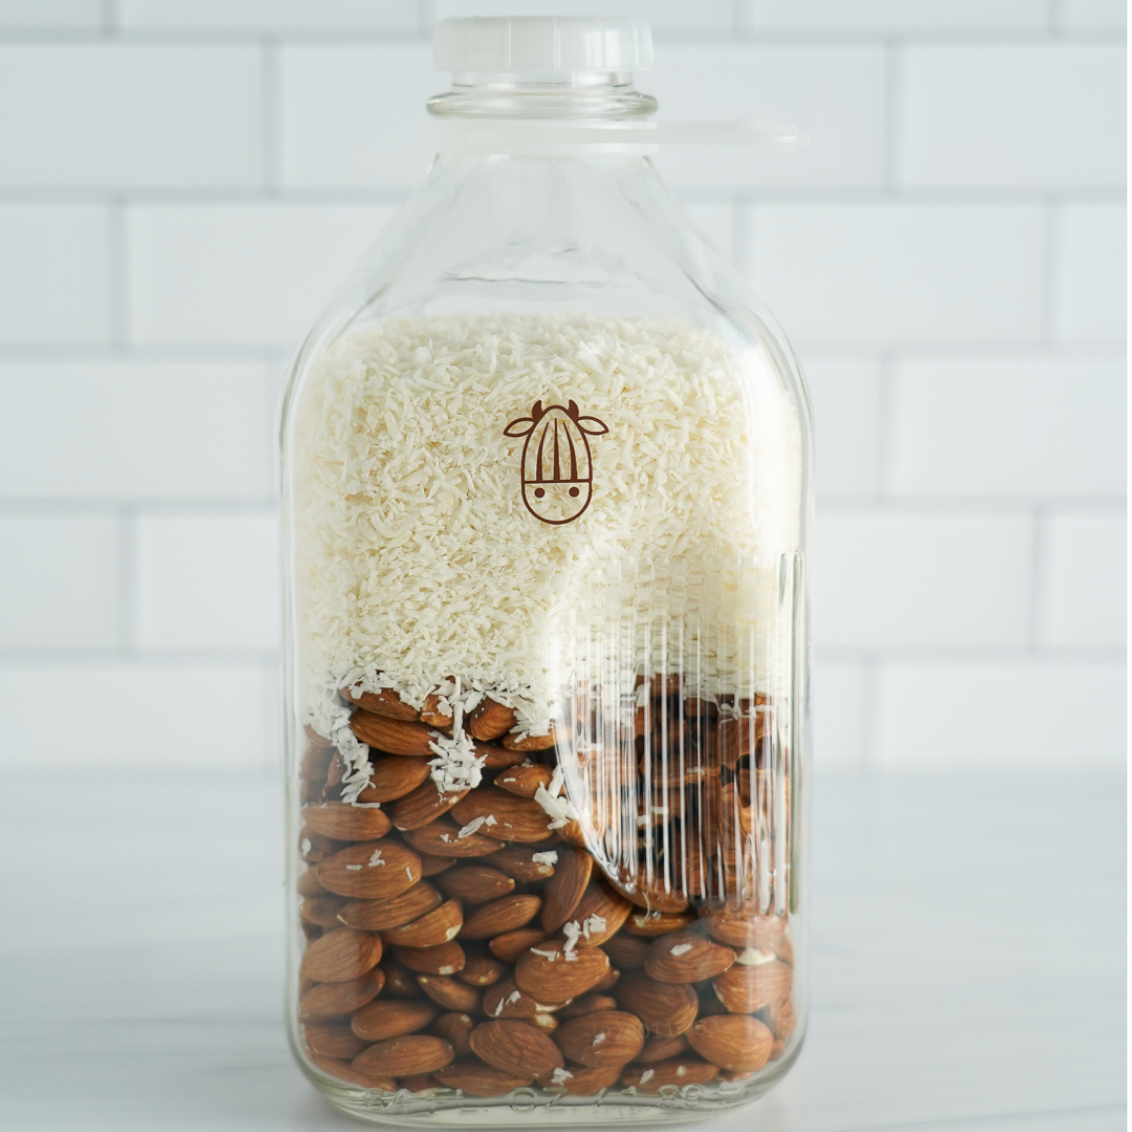 coconut shreds and almonds in the Almond Cow Glass Jug